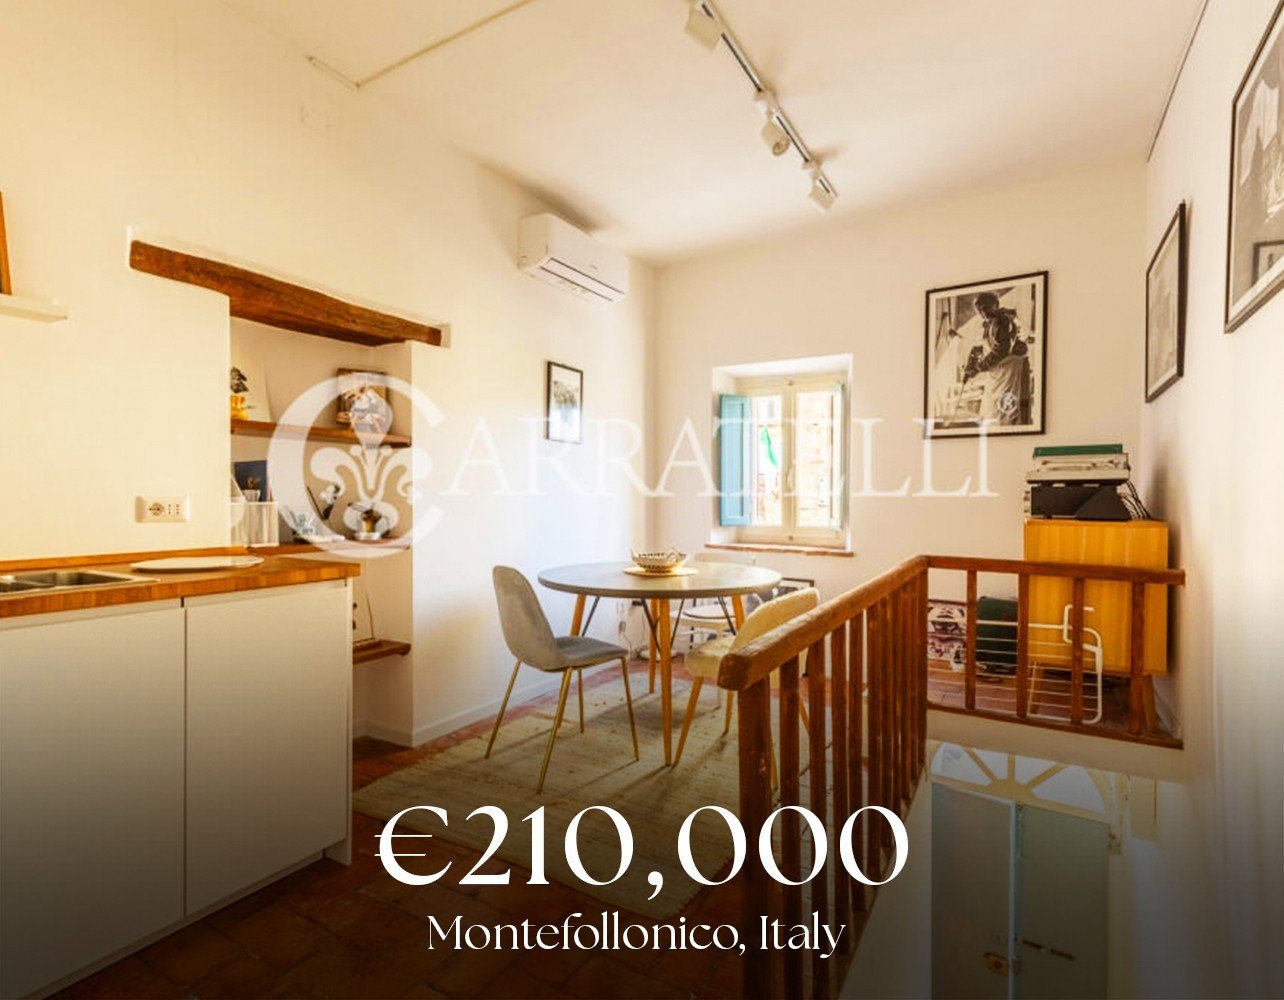 Get ready to live the Tuscan dream in this charming 1-bedroom, 1-bathroom townhouse located in the heart of Montefollonico. With a spacious living area/art studio boasting panoramic views, this 90 sqm property is perfect for creative souls seeking in